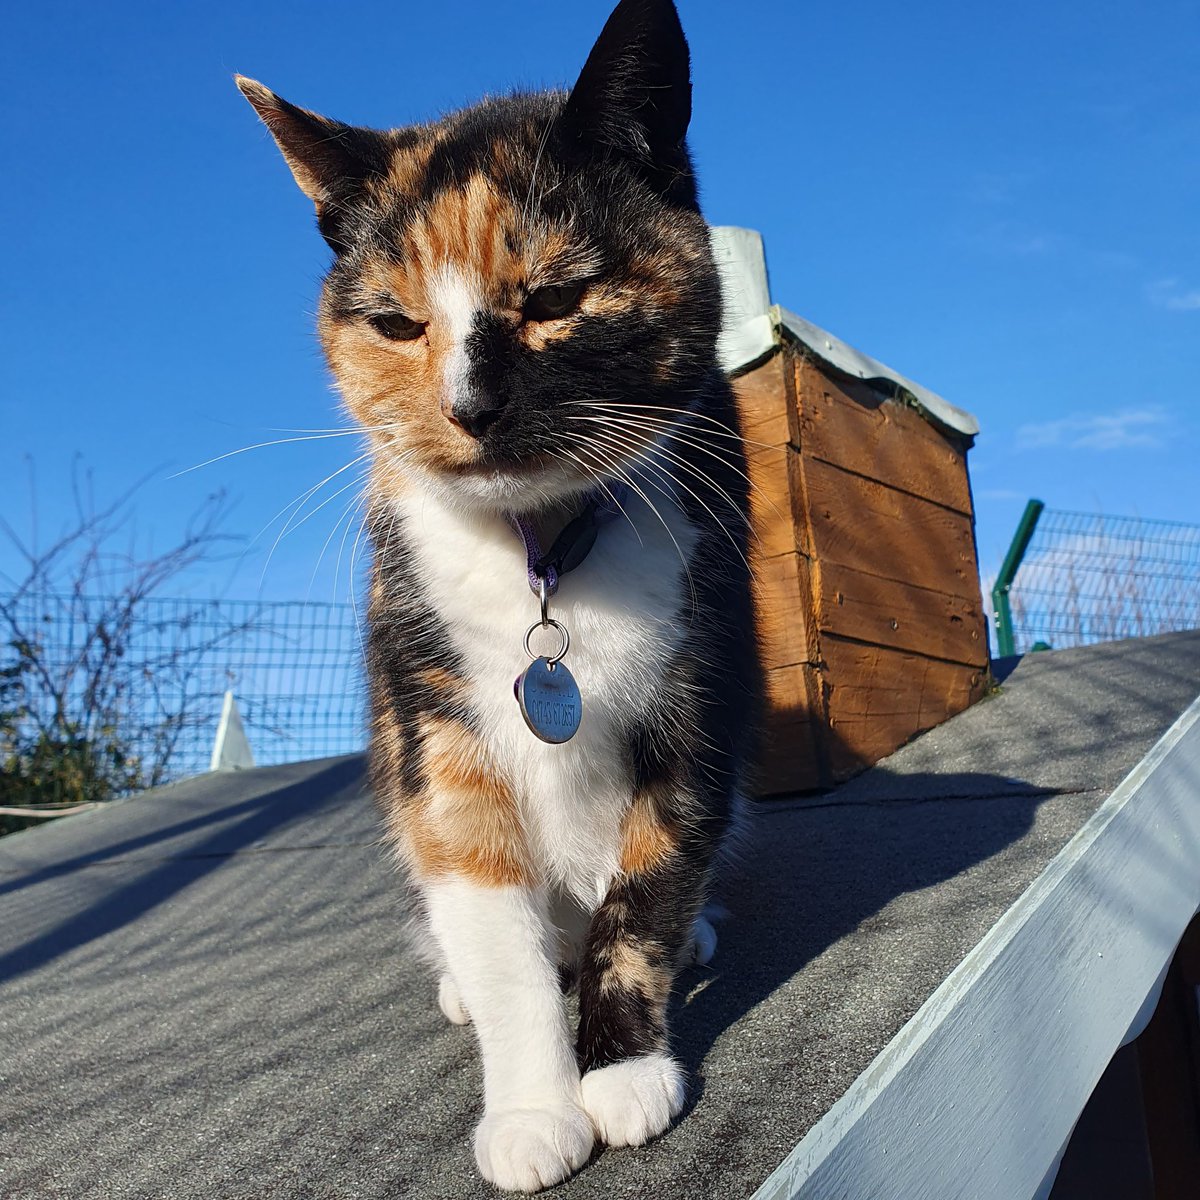 #WednesdayWhiskers ~ Jinkxie loves to climb on the cottage roofs in the Village where she can see what is going on around her. She is showing off her beautiful whiskers. #cats #catrescue #inthecompanyofcats #catvibes #tortiecats #charity